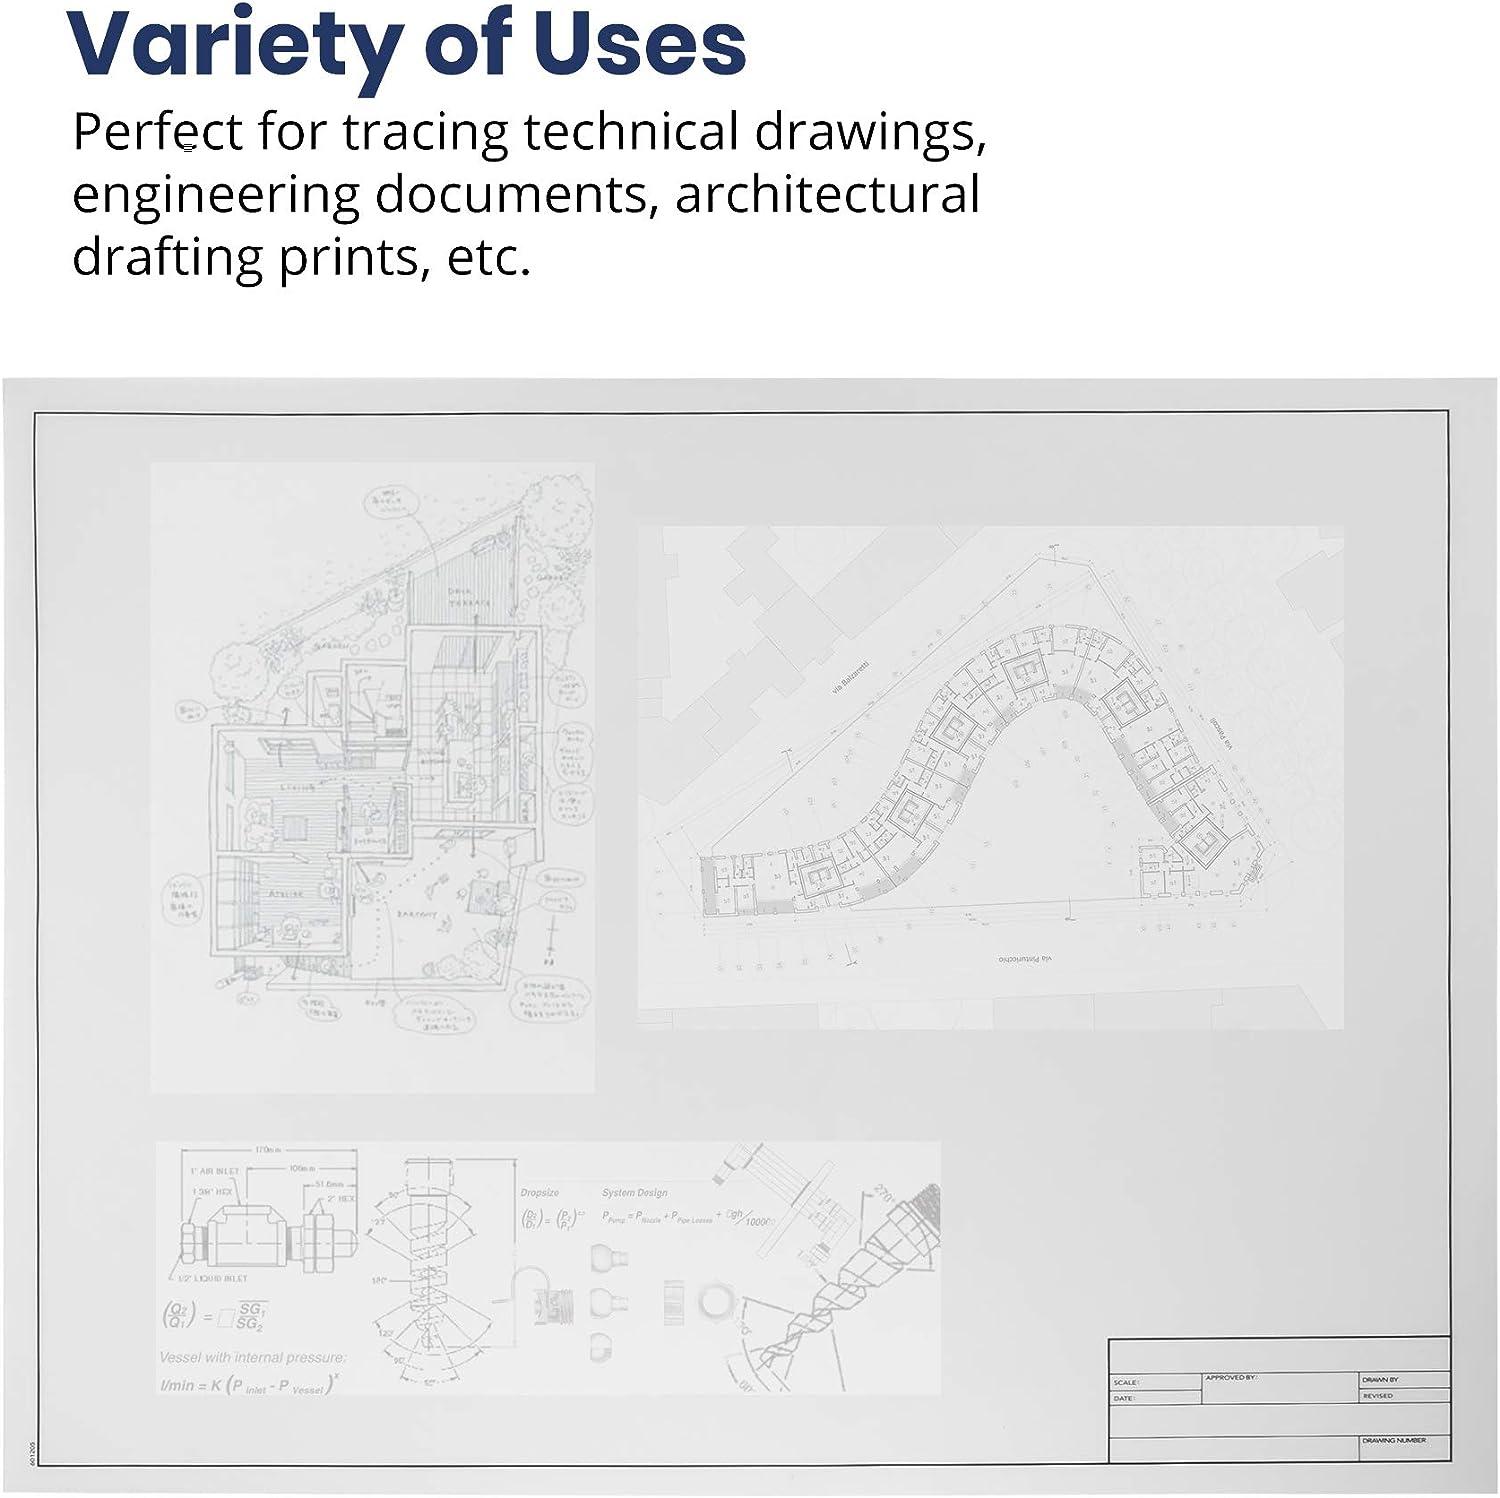 Pacific Arc, Drafting Vellum Sheets, 10-Sheets 8.5 x 11 inches Paper Rag  Vellum